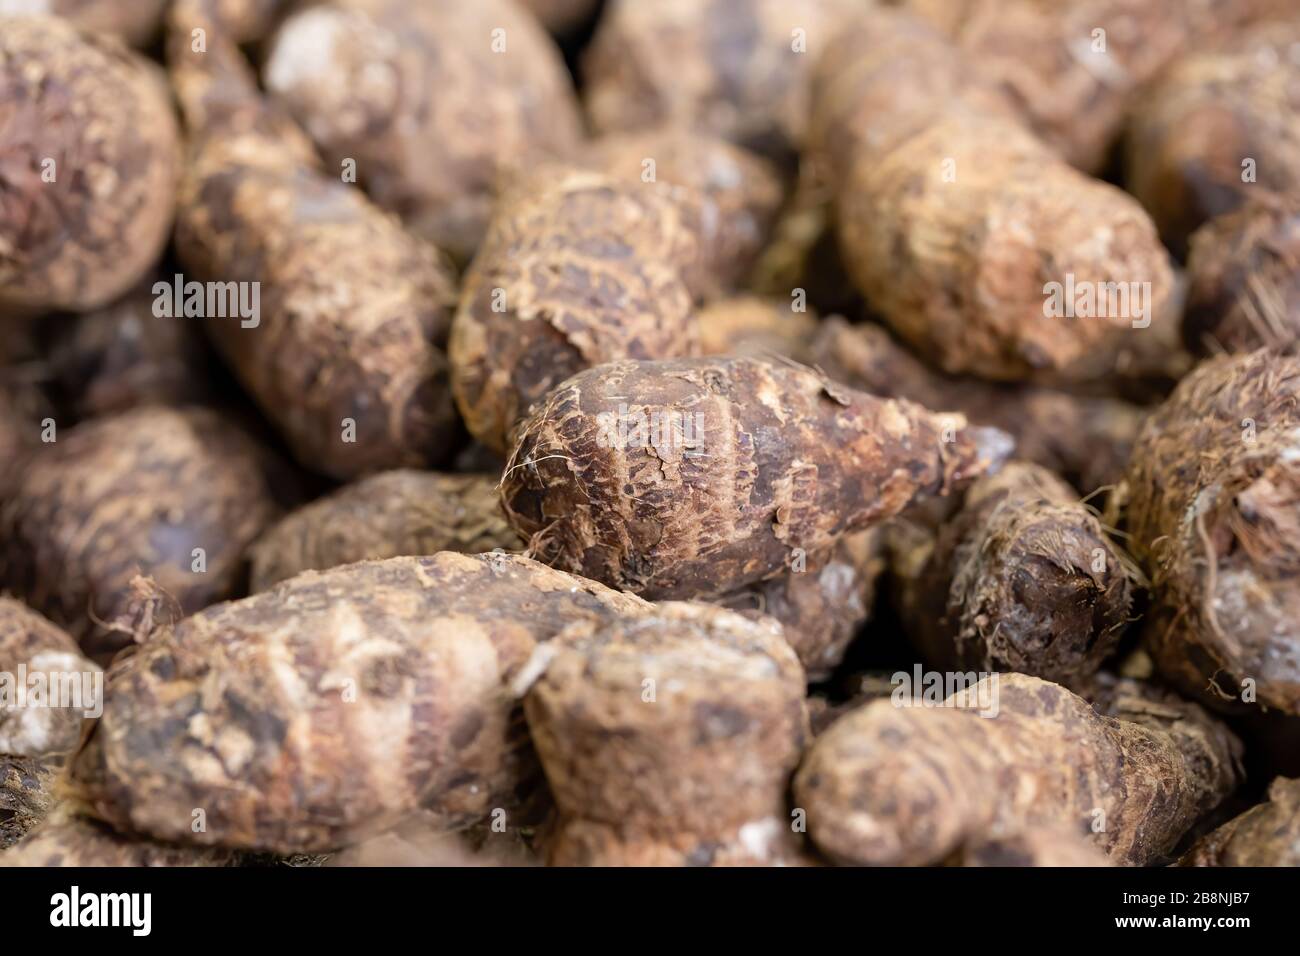 Pile of raw, unpeeled tropical Eddoe corms, Colocasia antiquorum, on a market stall in Ealing, West London Stock Photo